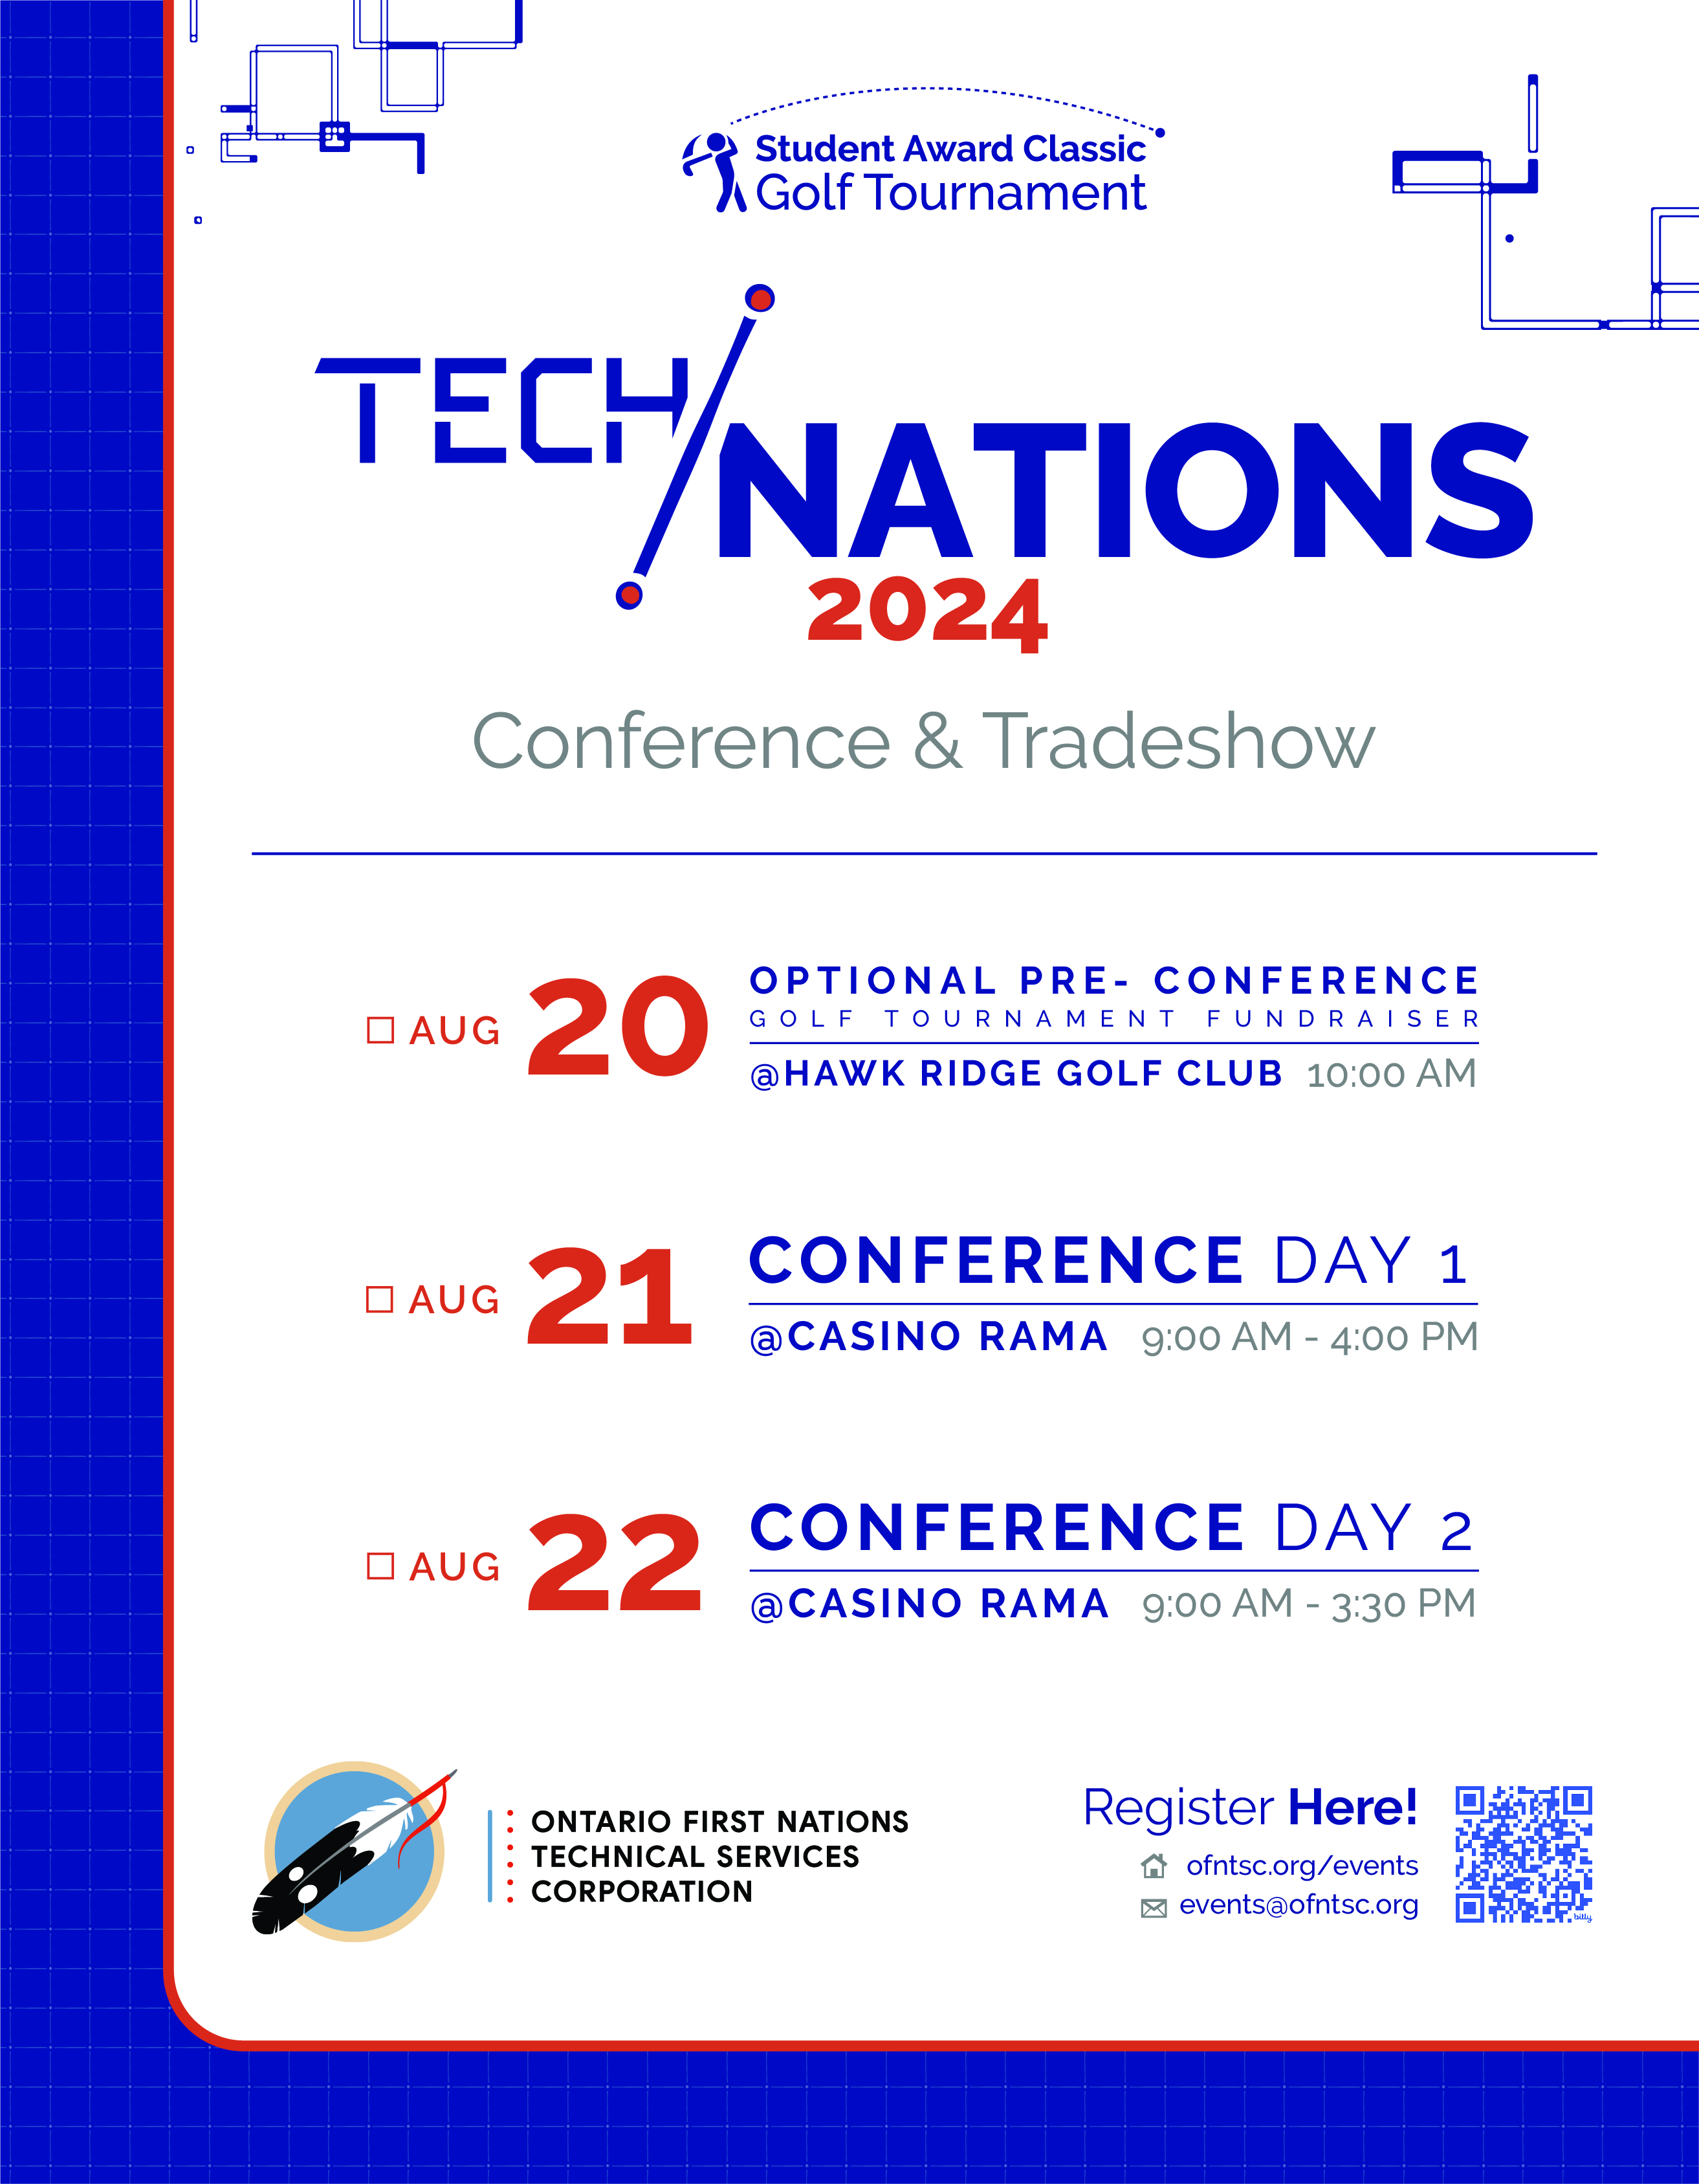 An image of the technations poster with the dates and pre-conference golf tournament are included. 